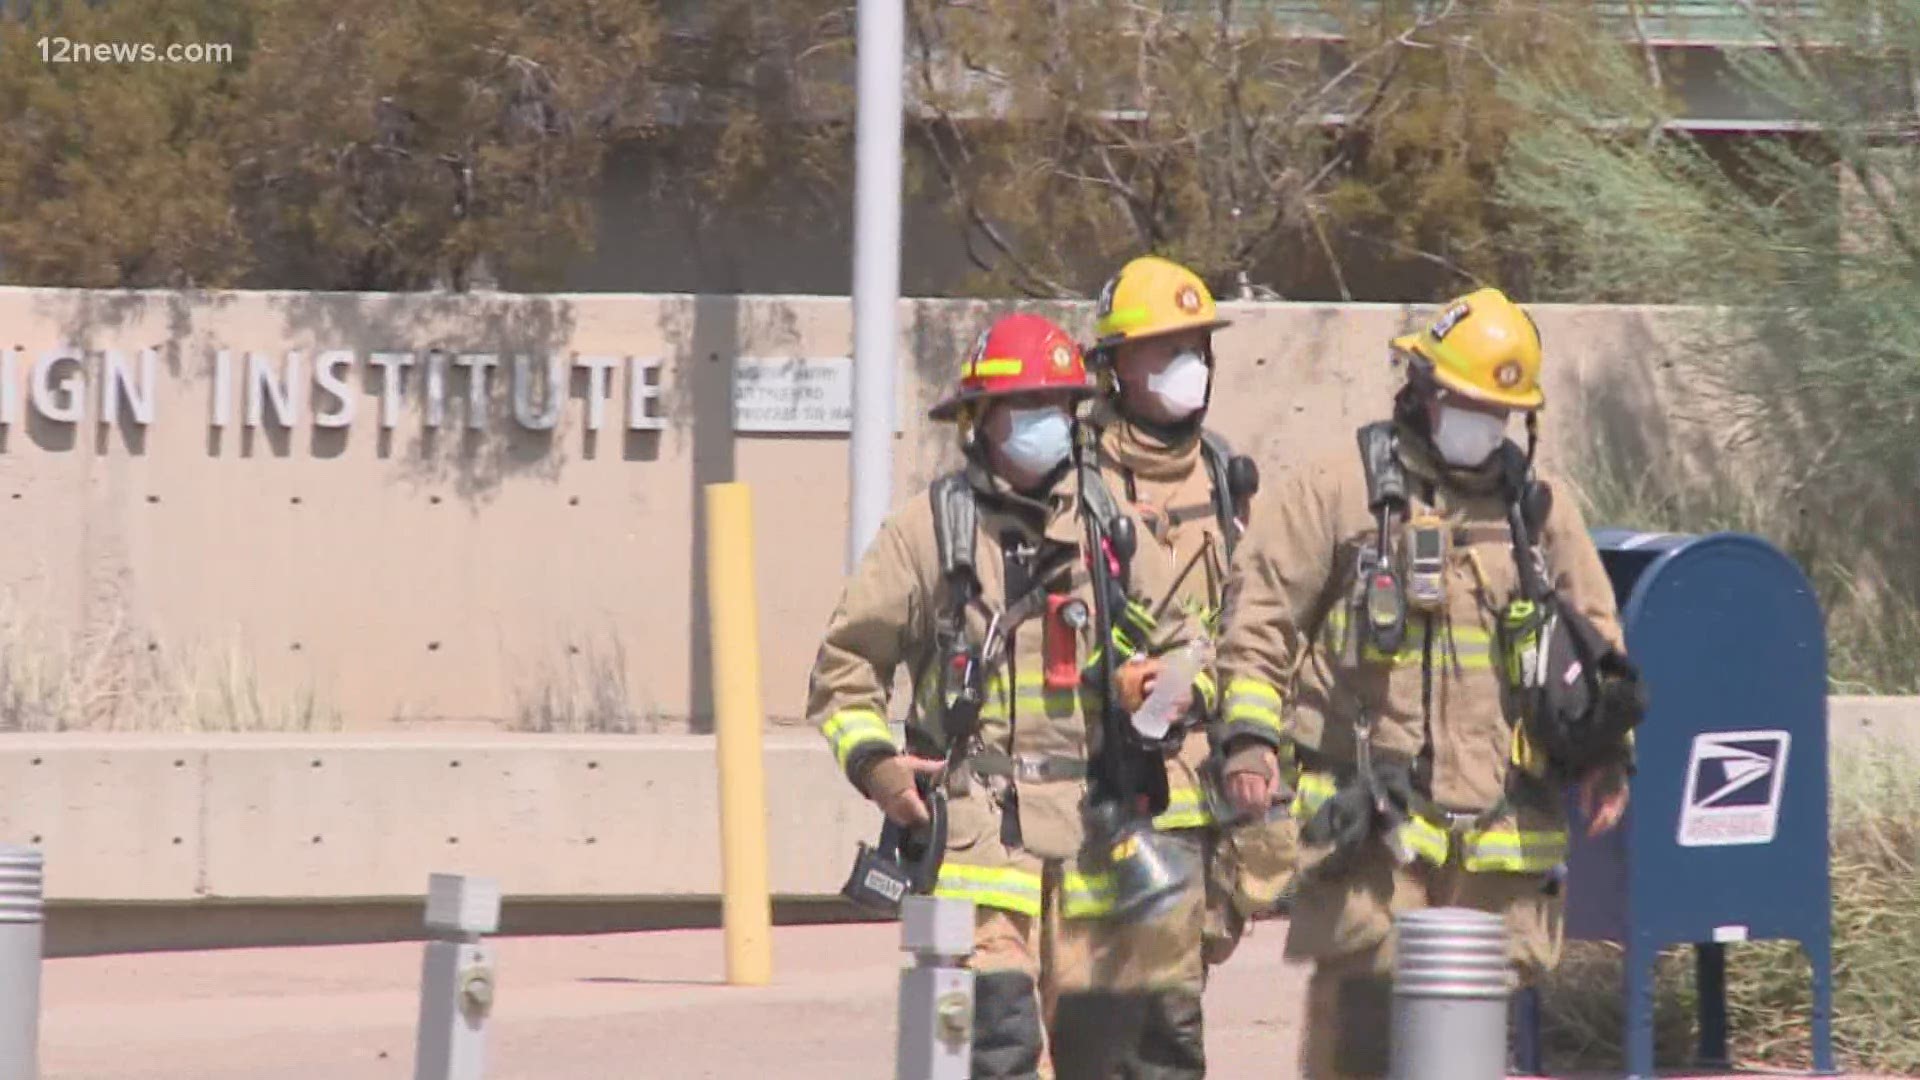 ASU students displaced following fire at dorm in Tempe